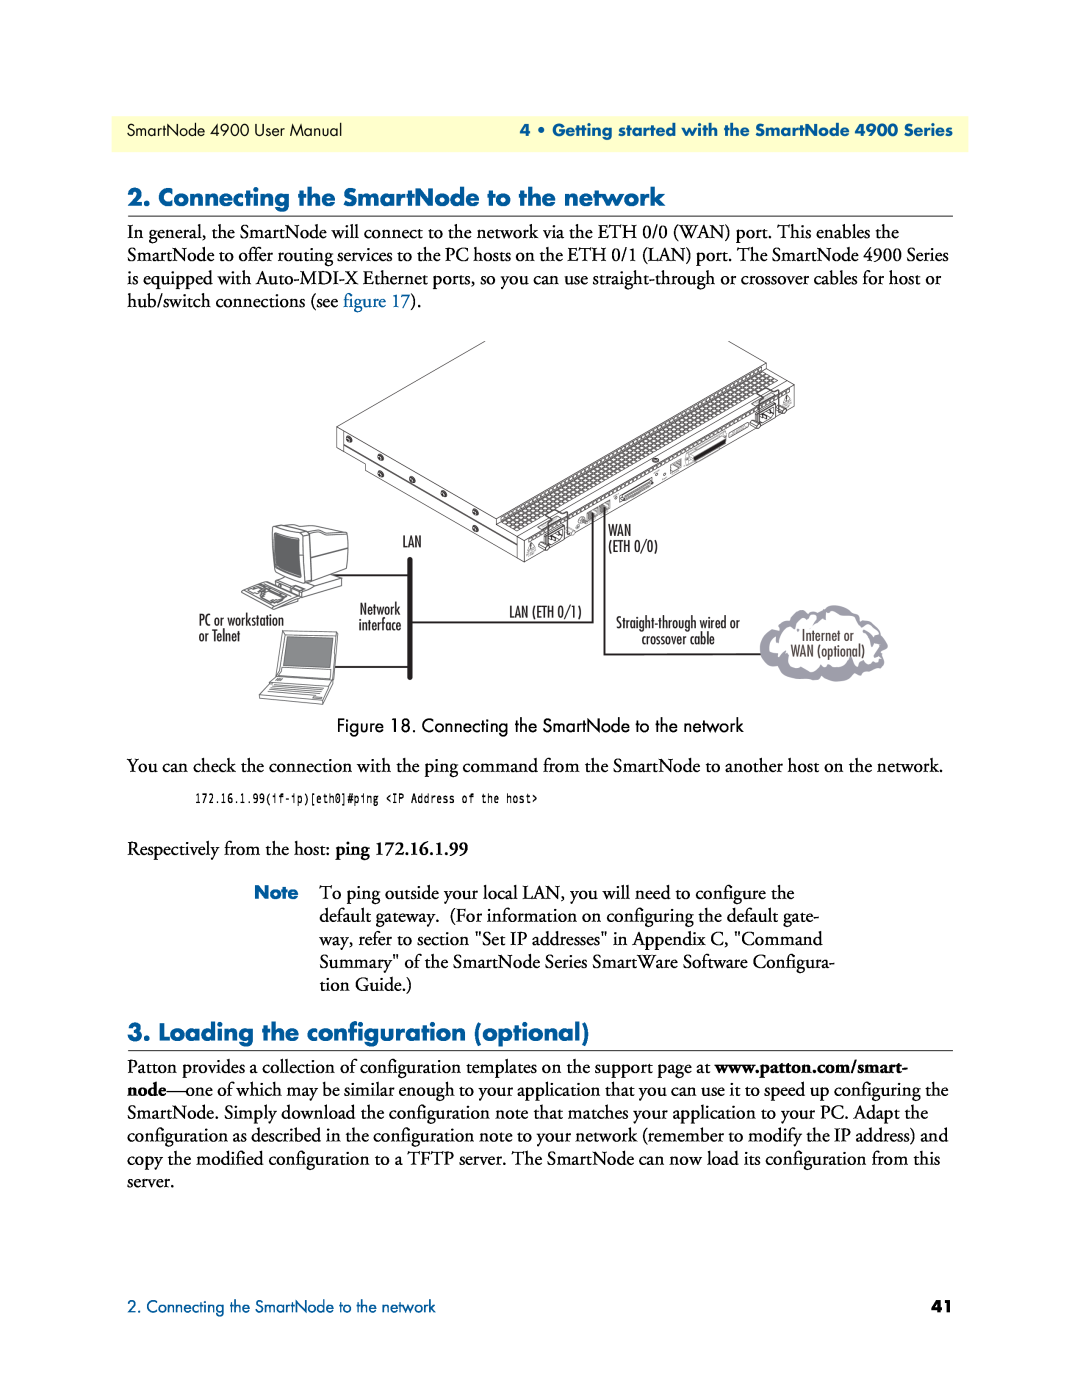 Patton electronic 4900 user manual Connecting the SmartNode to the network, Loading the configuration optional 